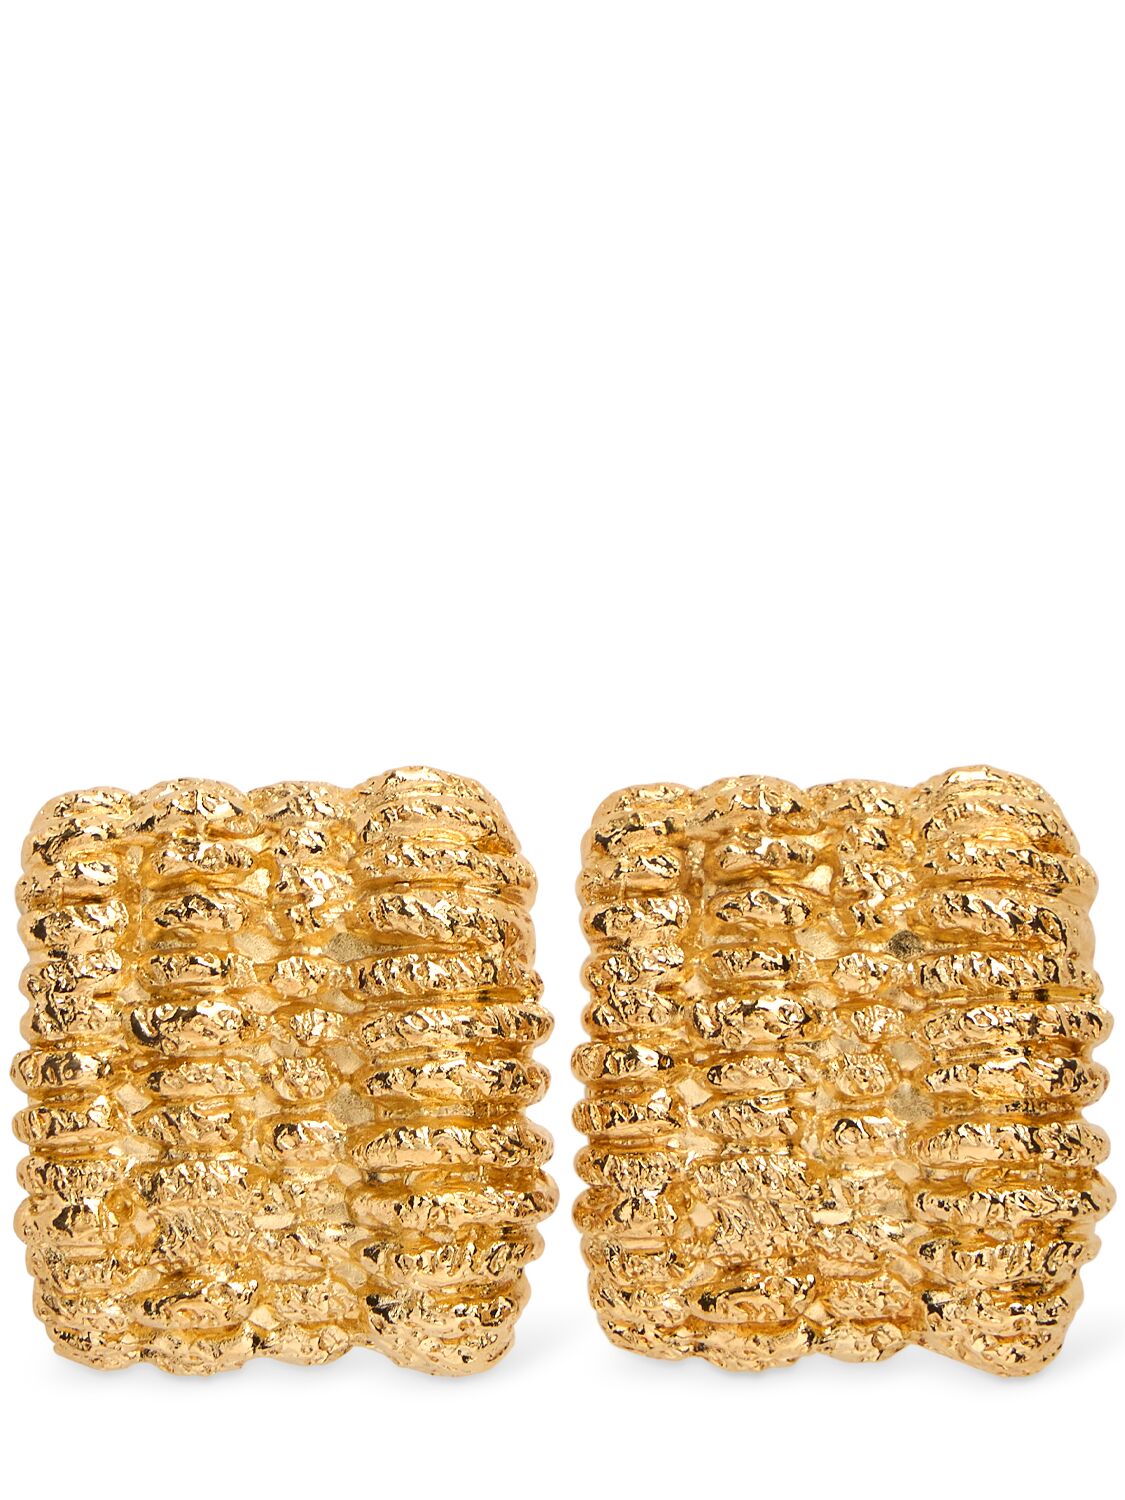 Paola Sighinolfi Small Sonora Stud Earrings In Gold